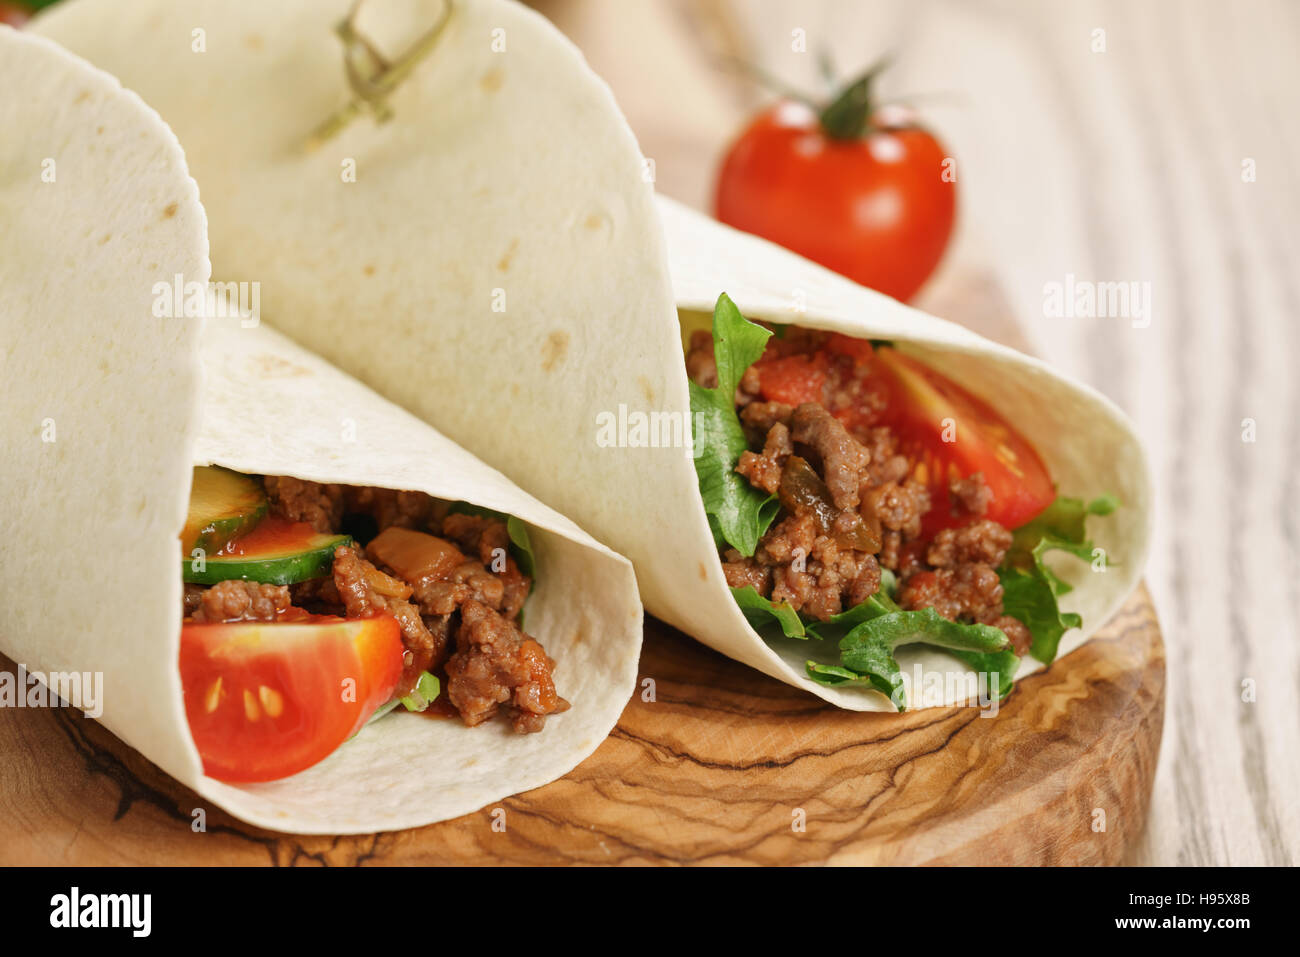 homemade tortilla with beef, frillice and vegetables on wooden board Stock Photo